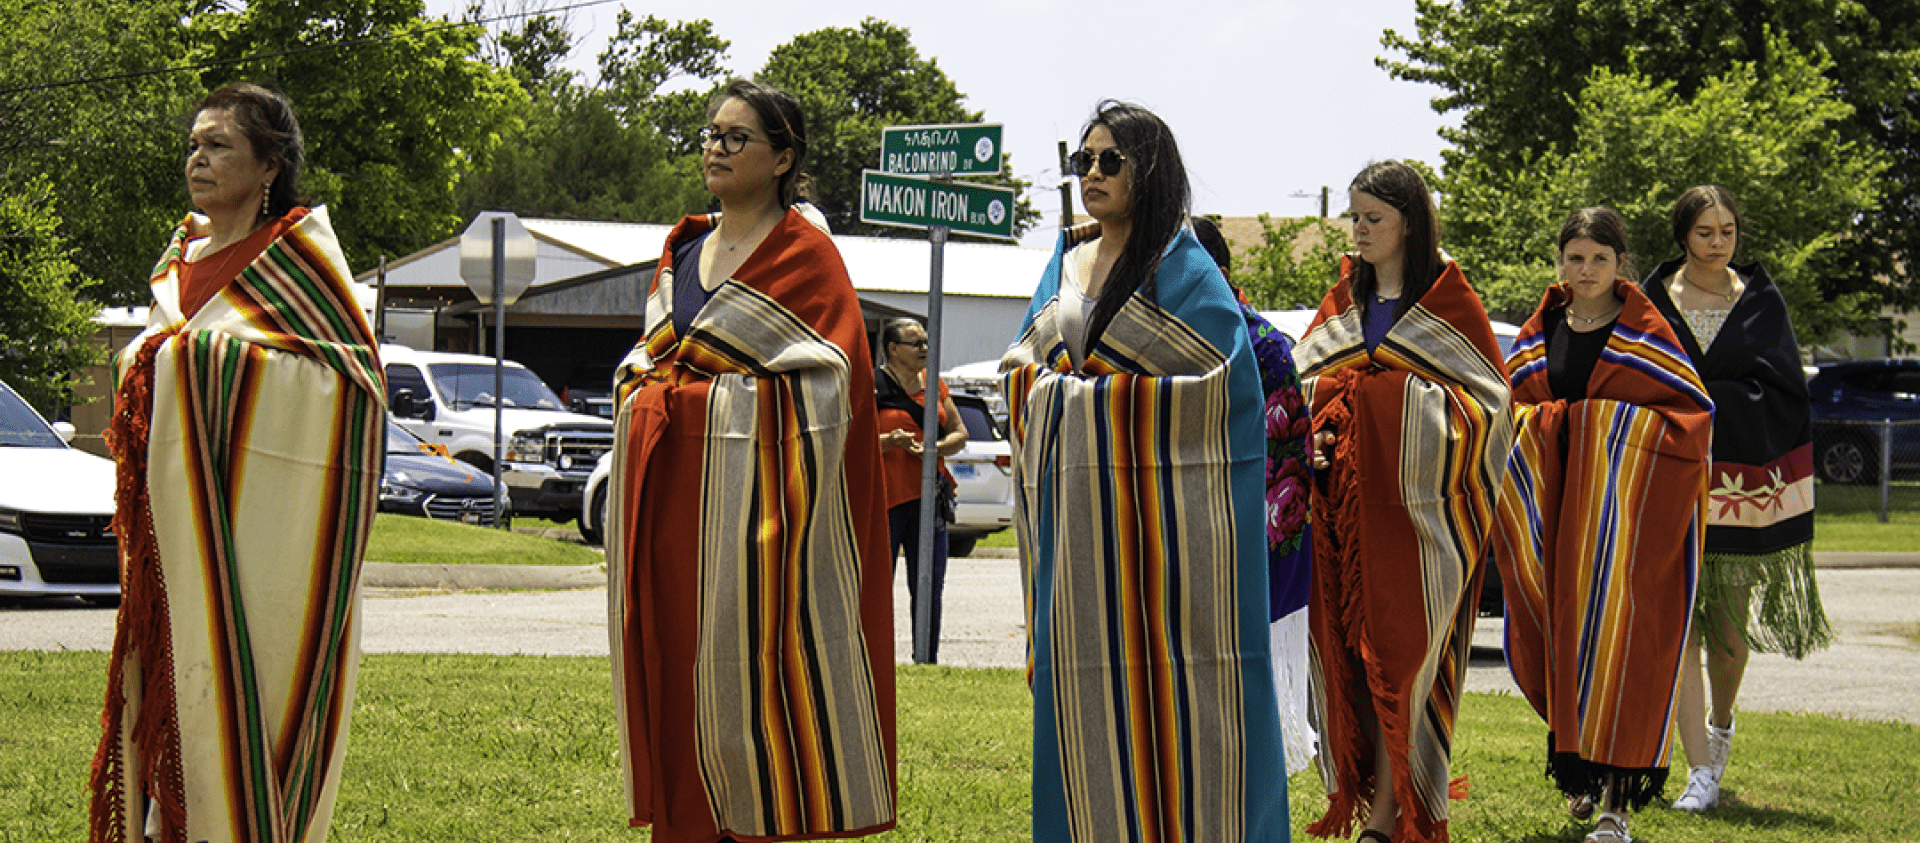 Wahzahzhe women complete the line during the procession to pay for the drum (Pawhuska 2021). 